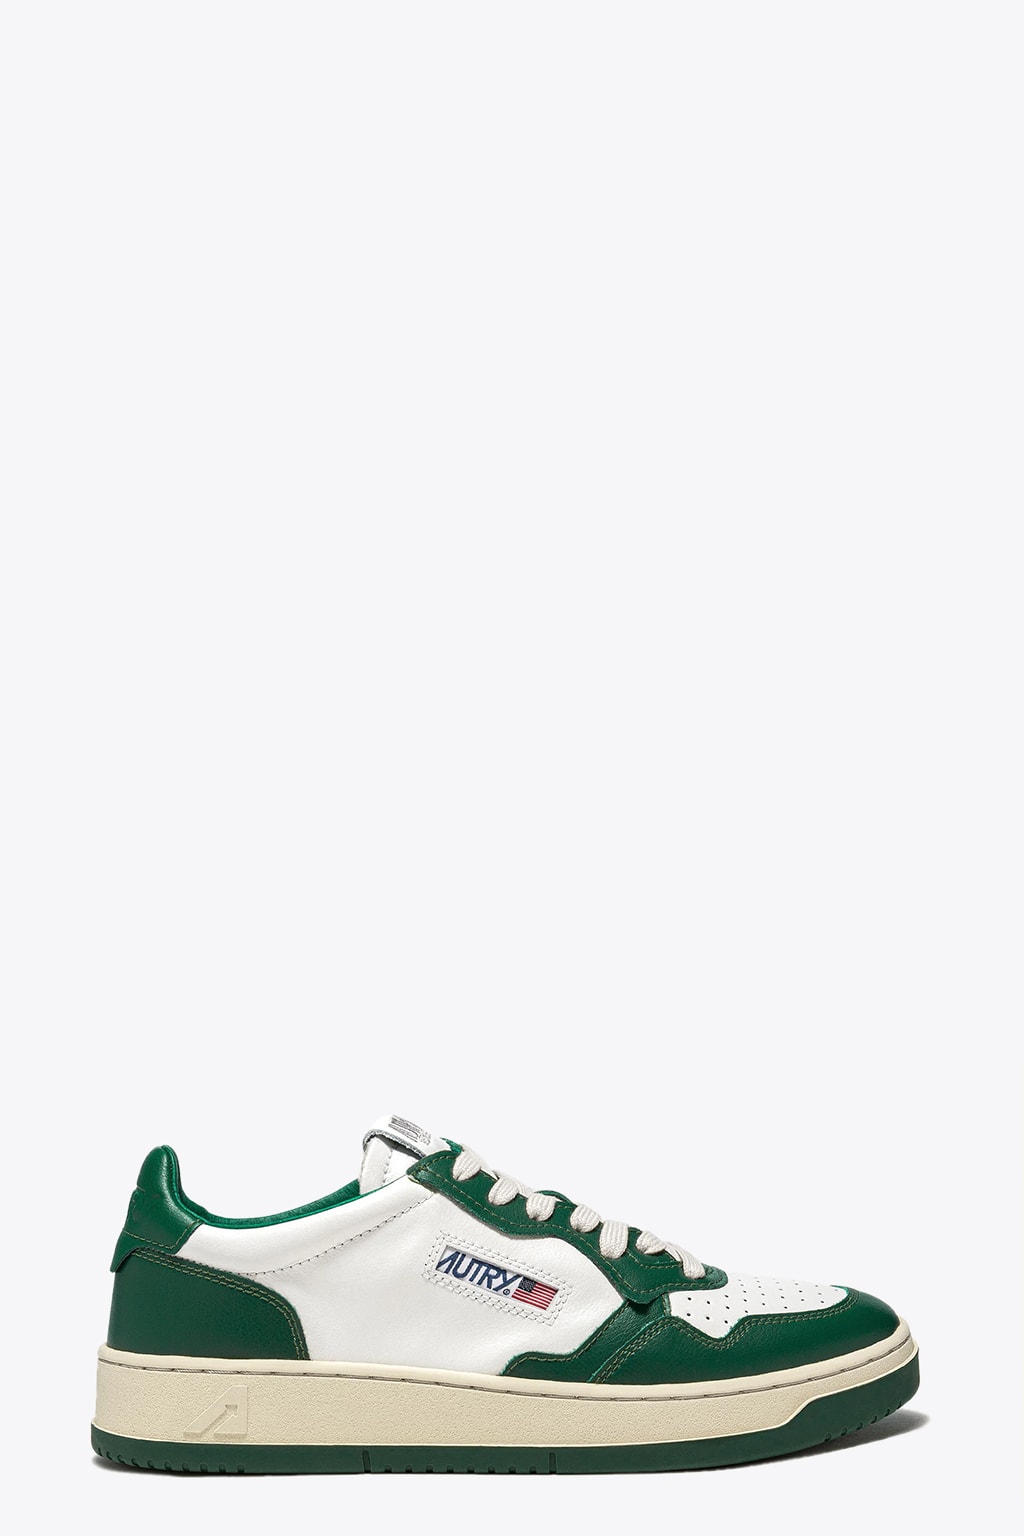 Autry 01 Low Man Leat Mountain White and green leather low sneaker - Medalist